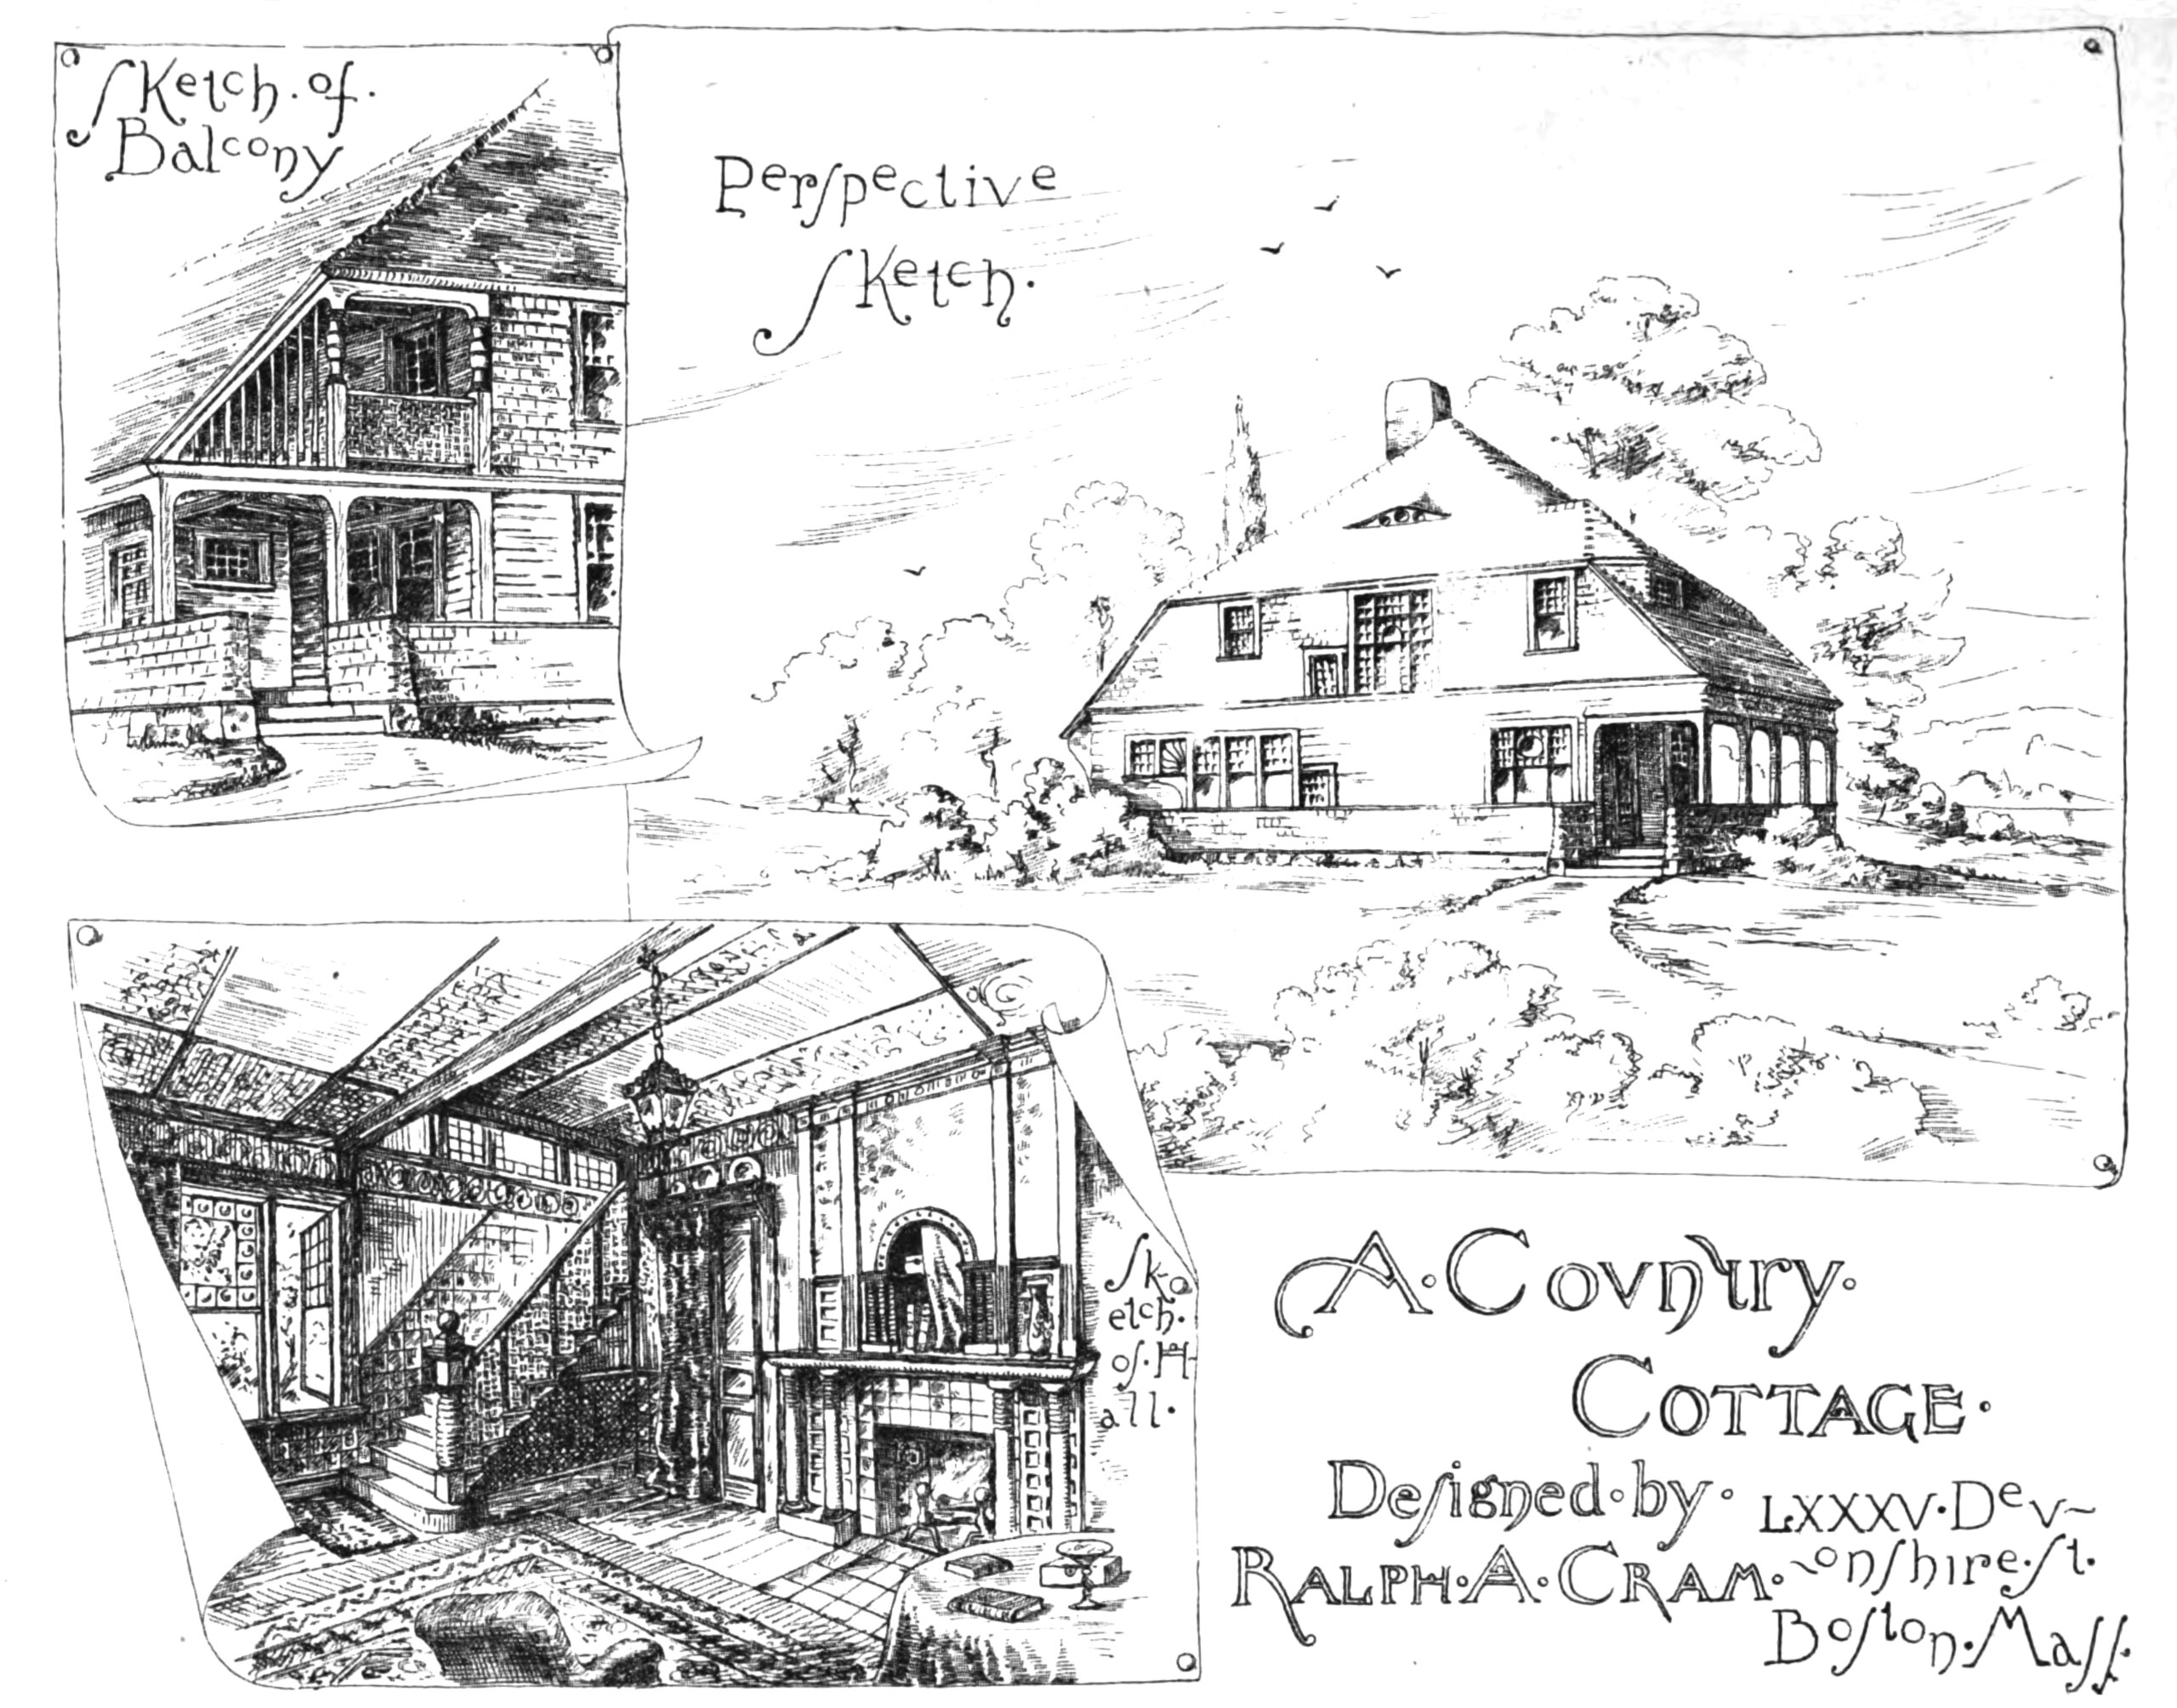 black and white sketch of a cottage exterior and an interior showing a mantel and stair